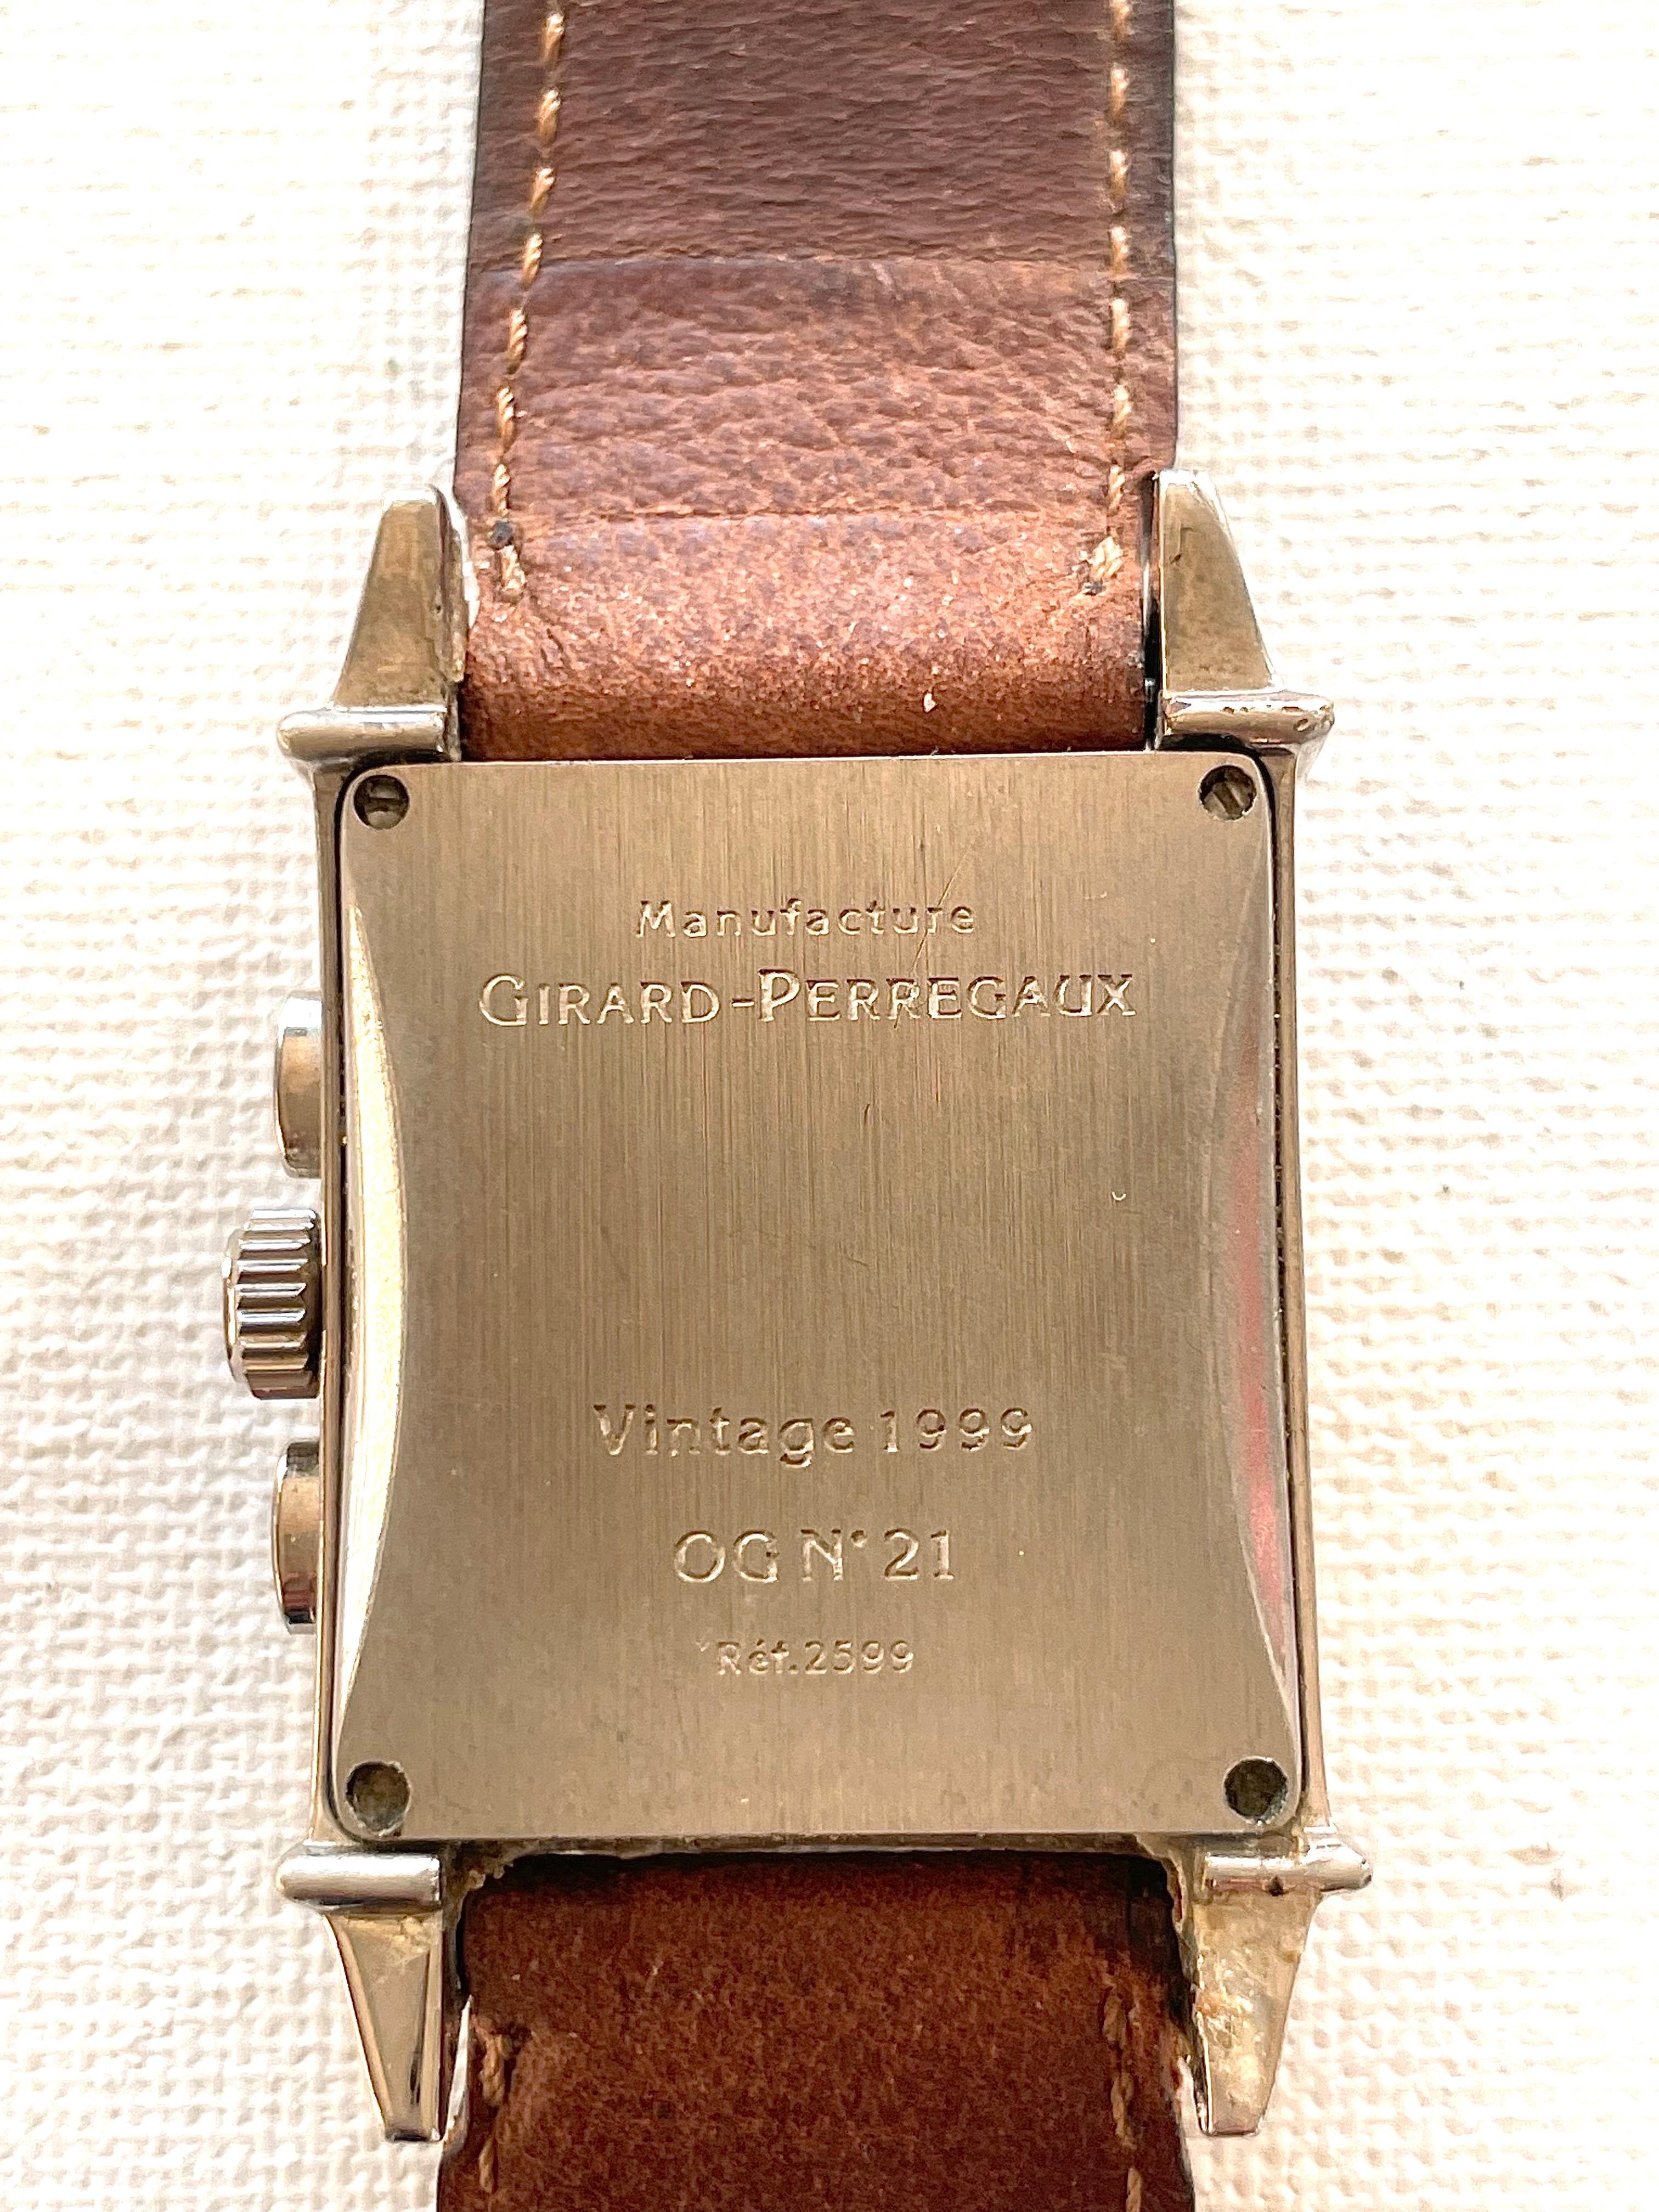 Late 20th Century Girard-Perregaux Time-Date Chronograph Automatic Wrist Watch Vintage, 1999 For Sale